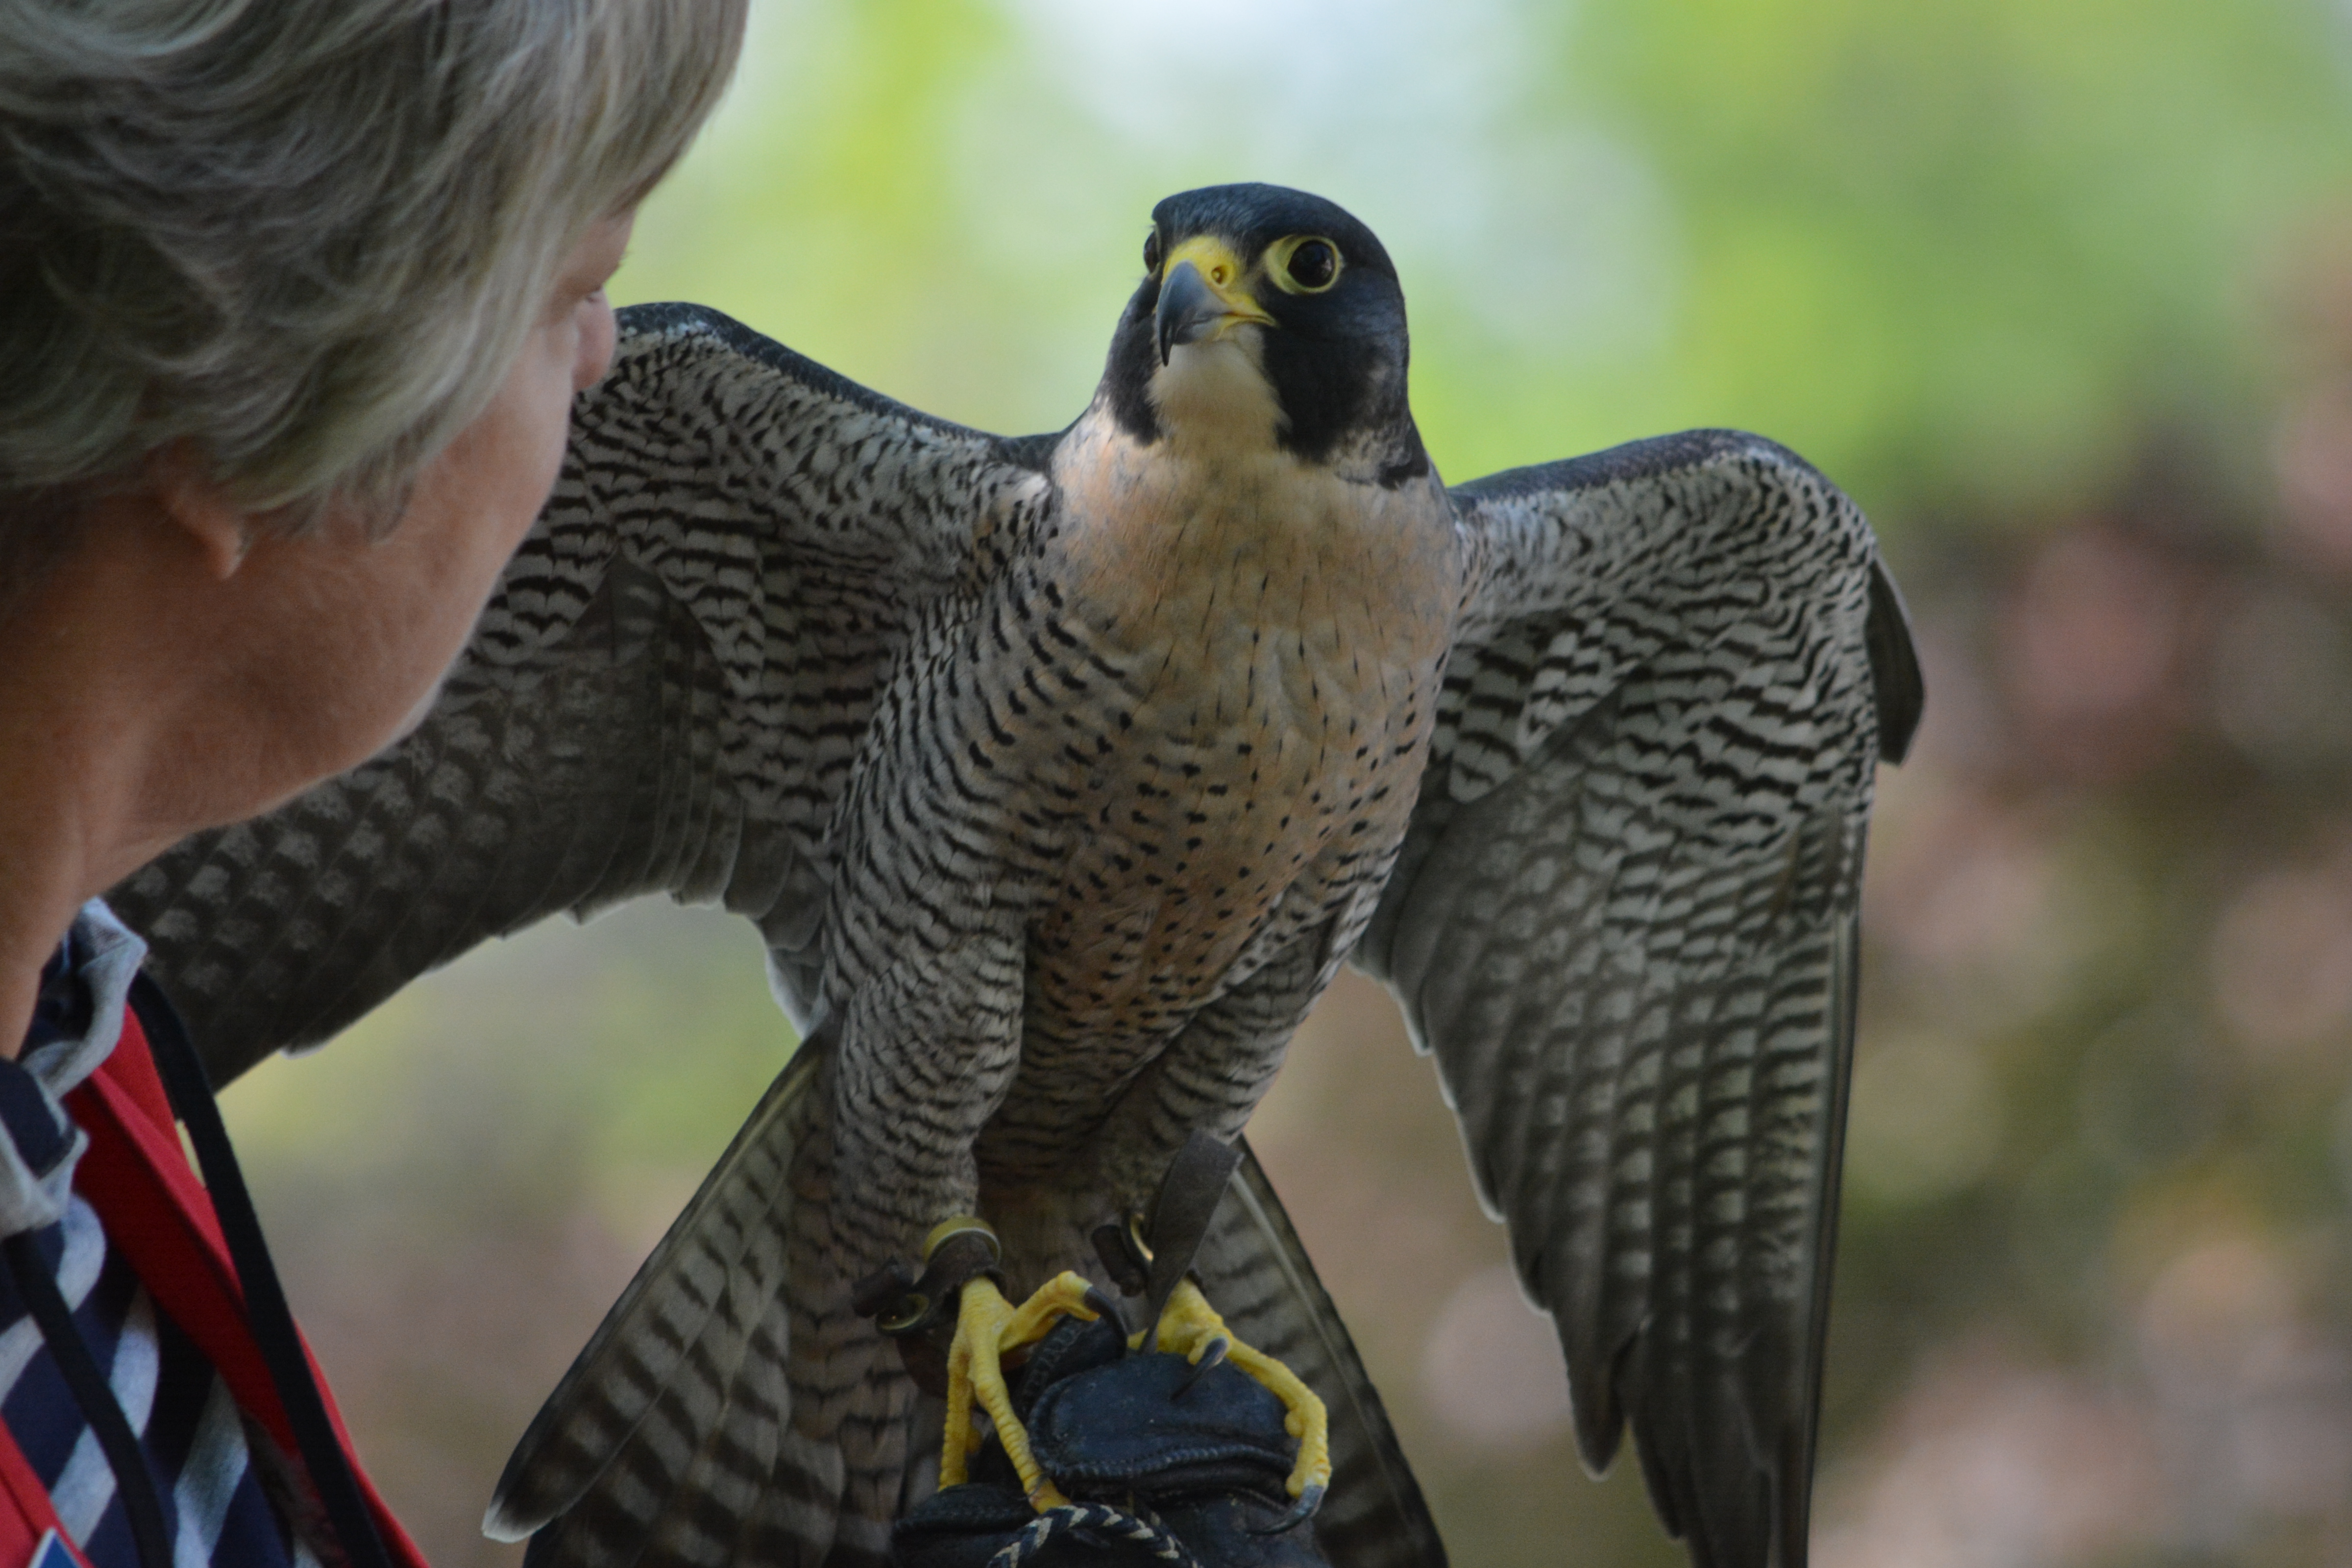 A volunteer holds Gus the Peregrine Falcon for a daily bird encounter at the World Center for Birds of Prey